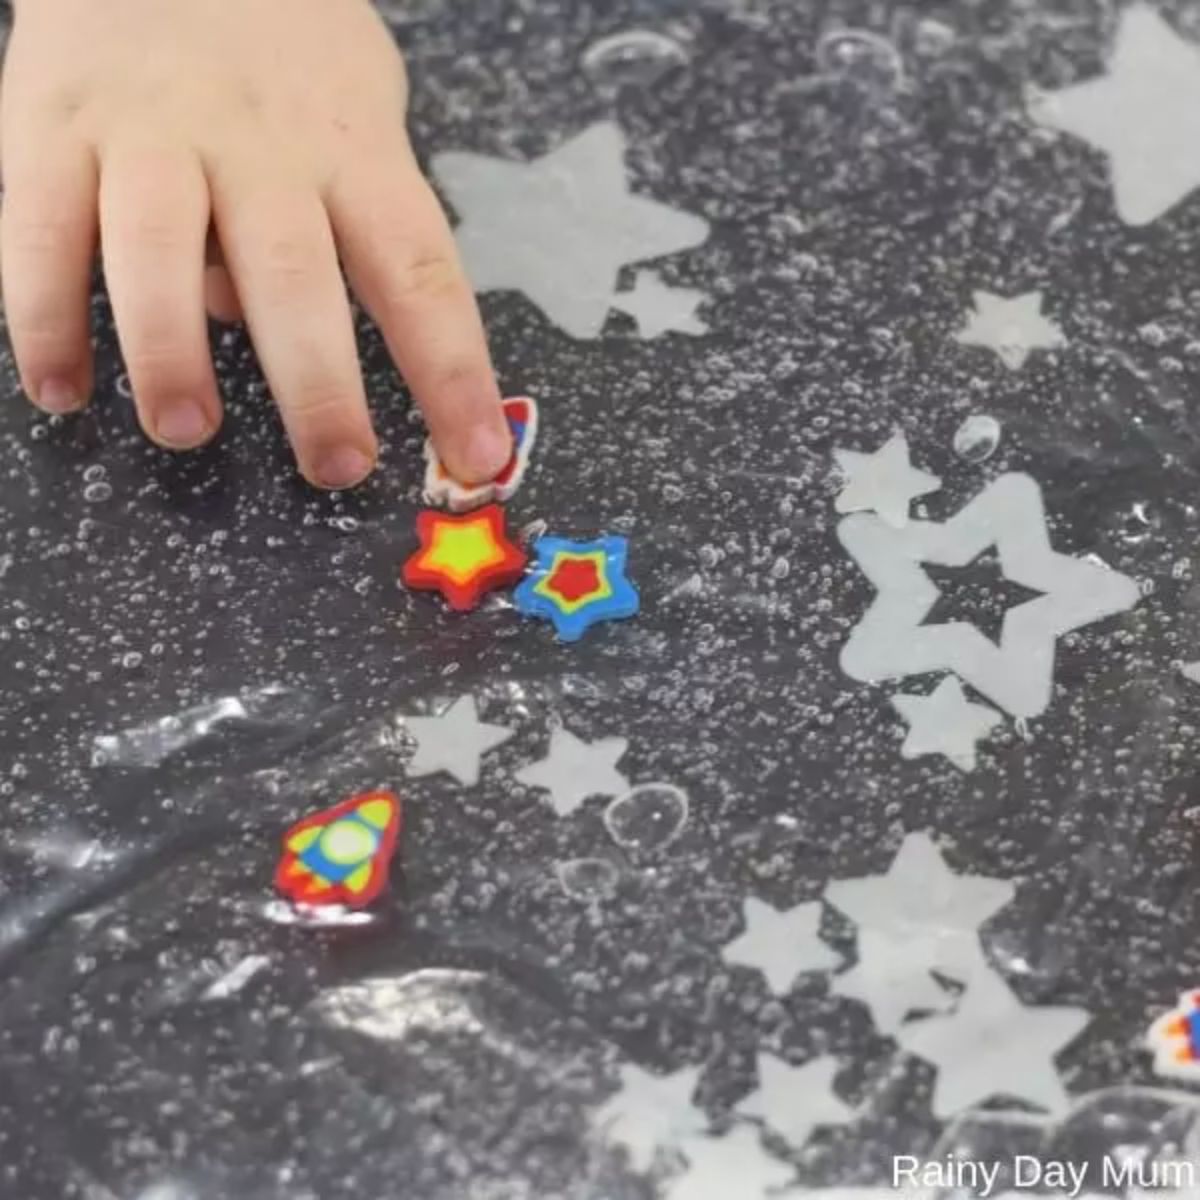 a hand reaches into a bag filled with star shapes